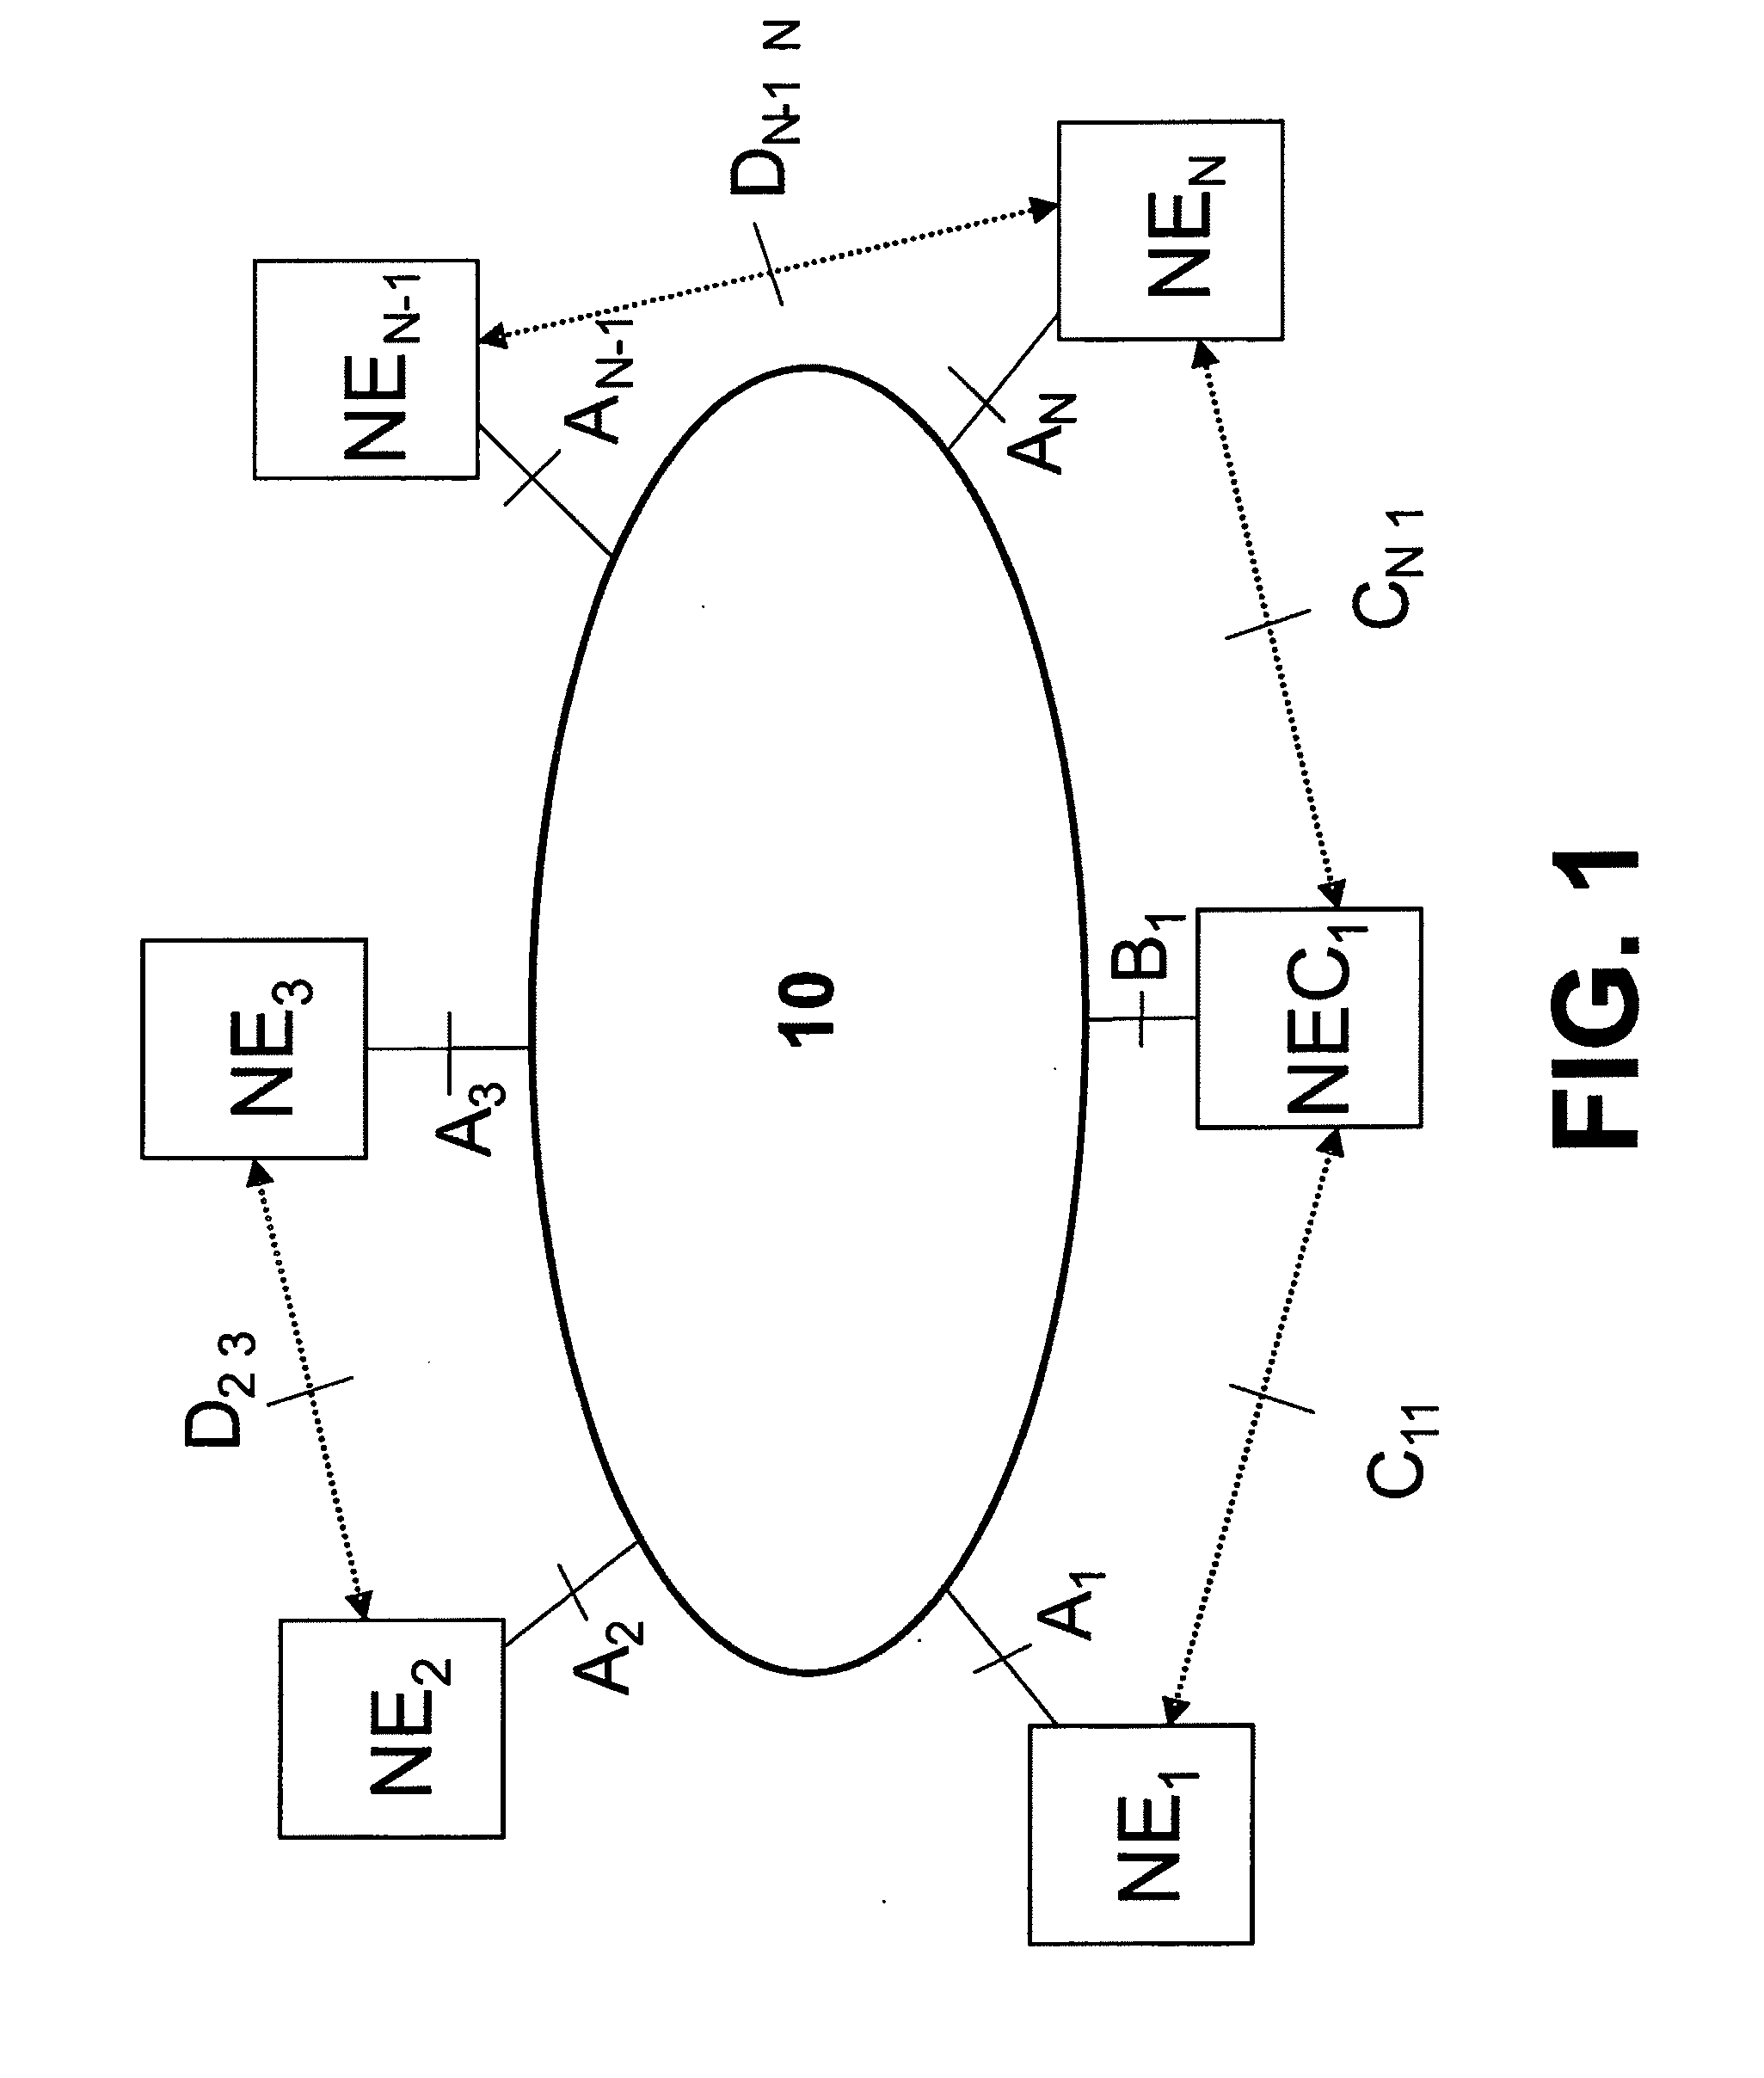 Method for logical deployment, undeployment and monitoring of a target IP network